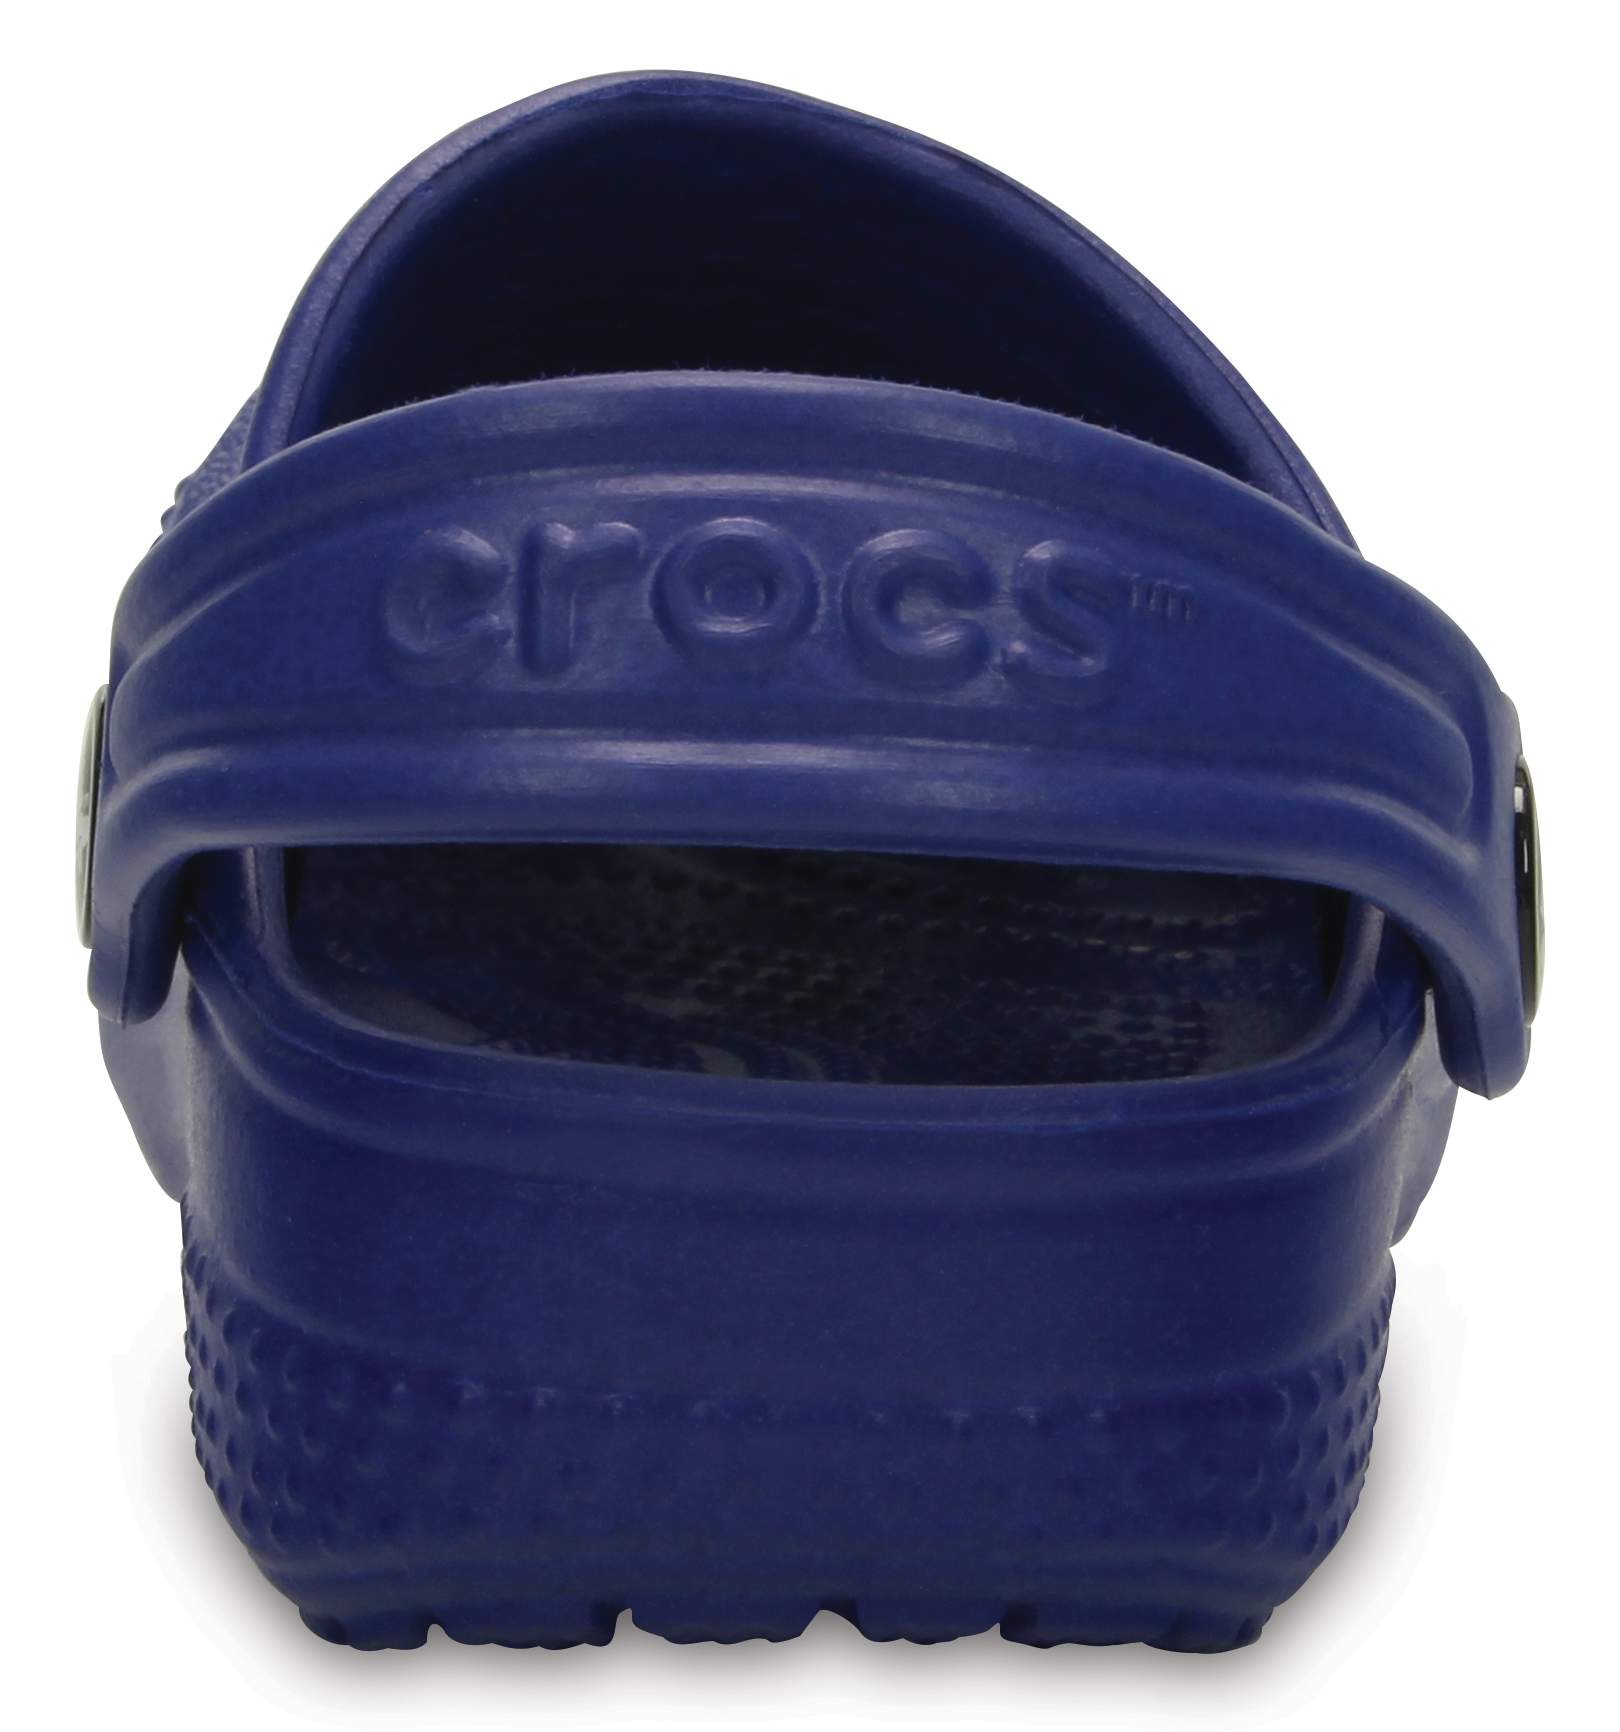 crocs size for 4 year old